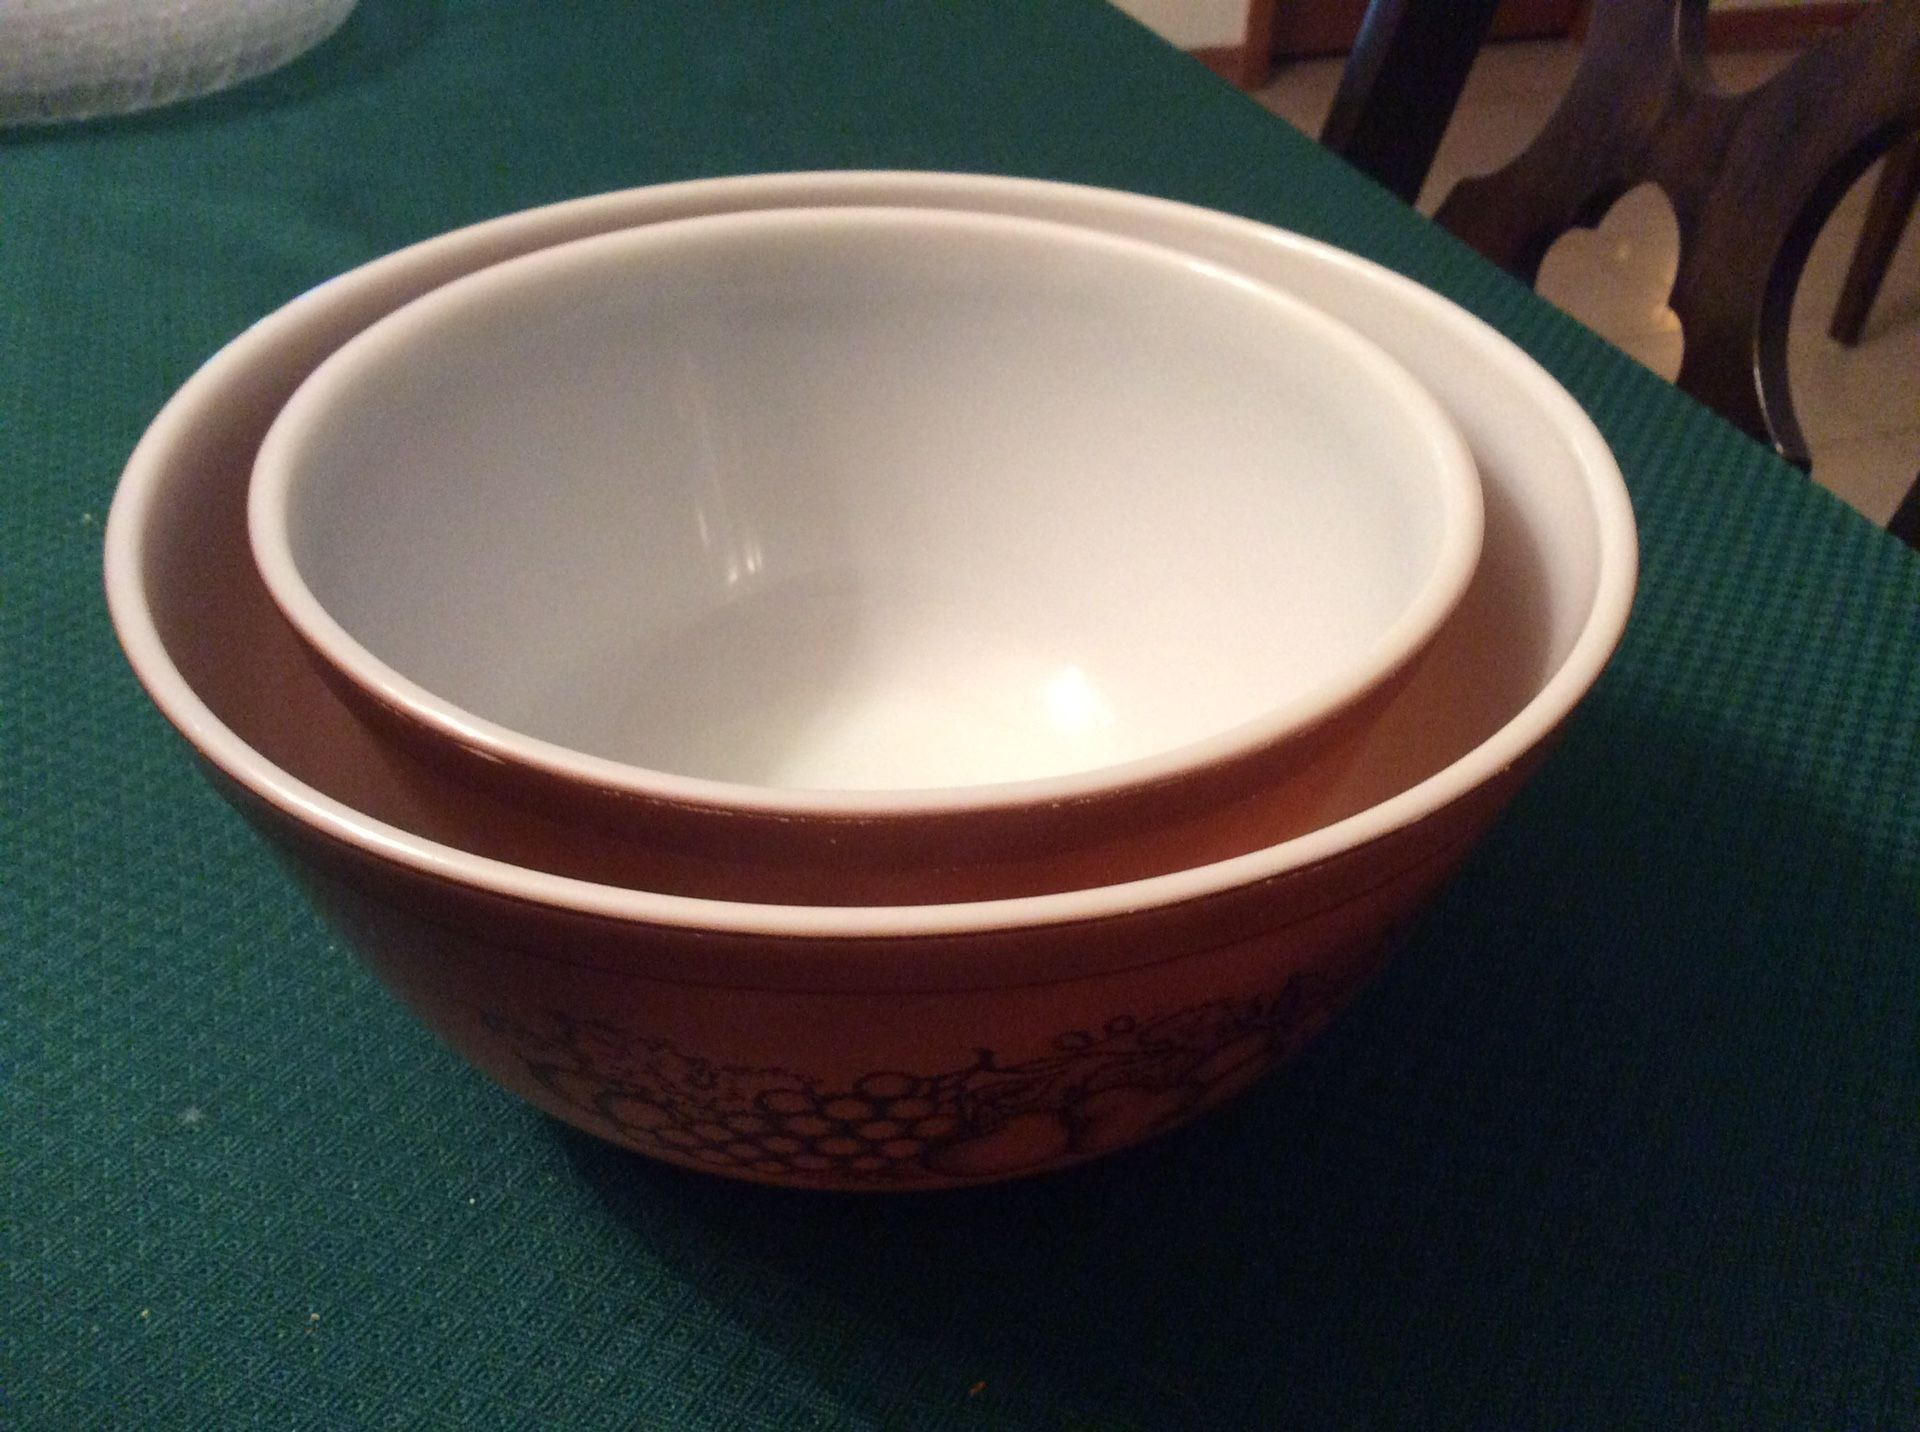 Pyrex 1956 Old Orchard bowl set in great condition for collectors